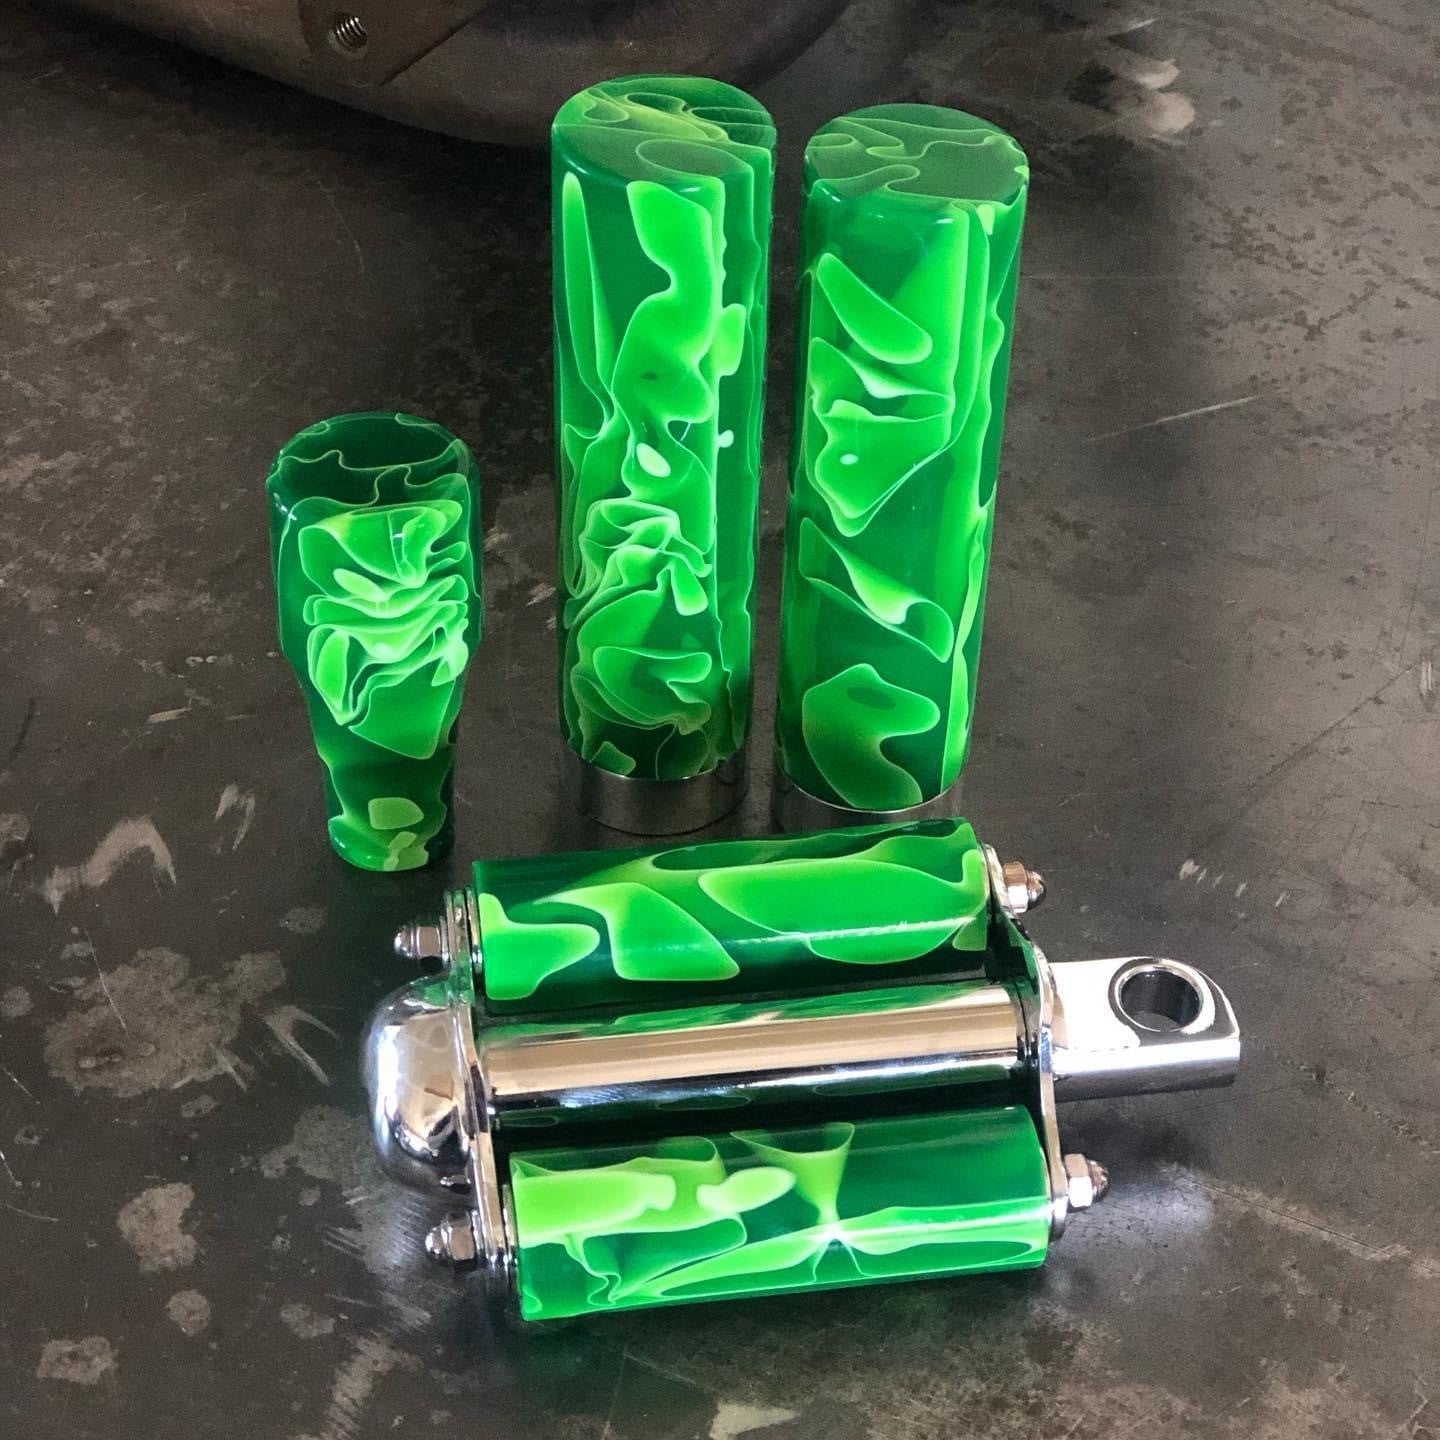 Green acrylic and metal grips, kicker pedal, and shift knob for motorcycle